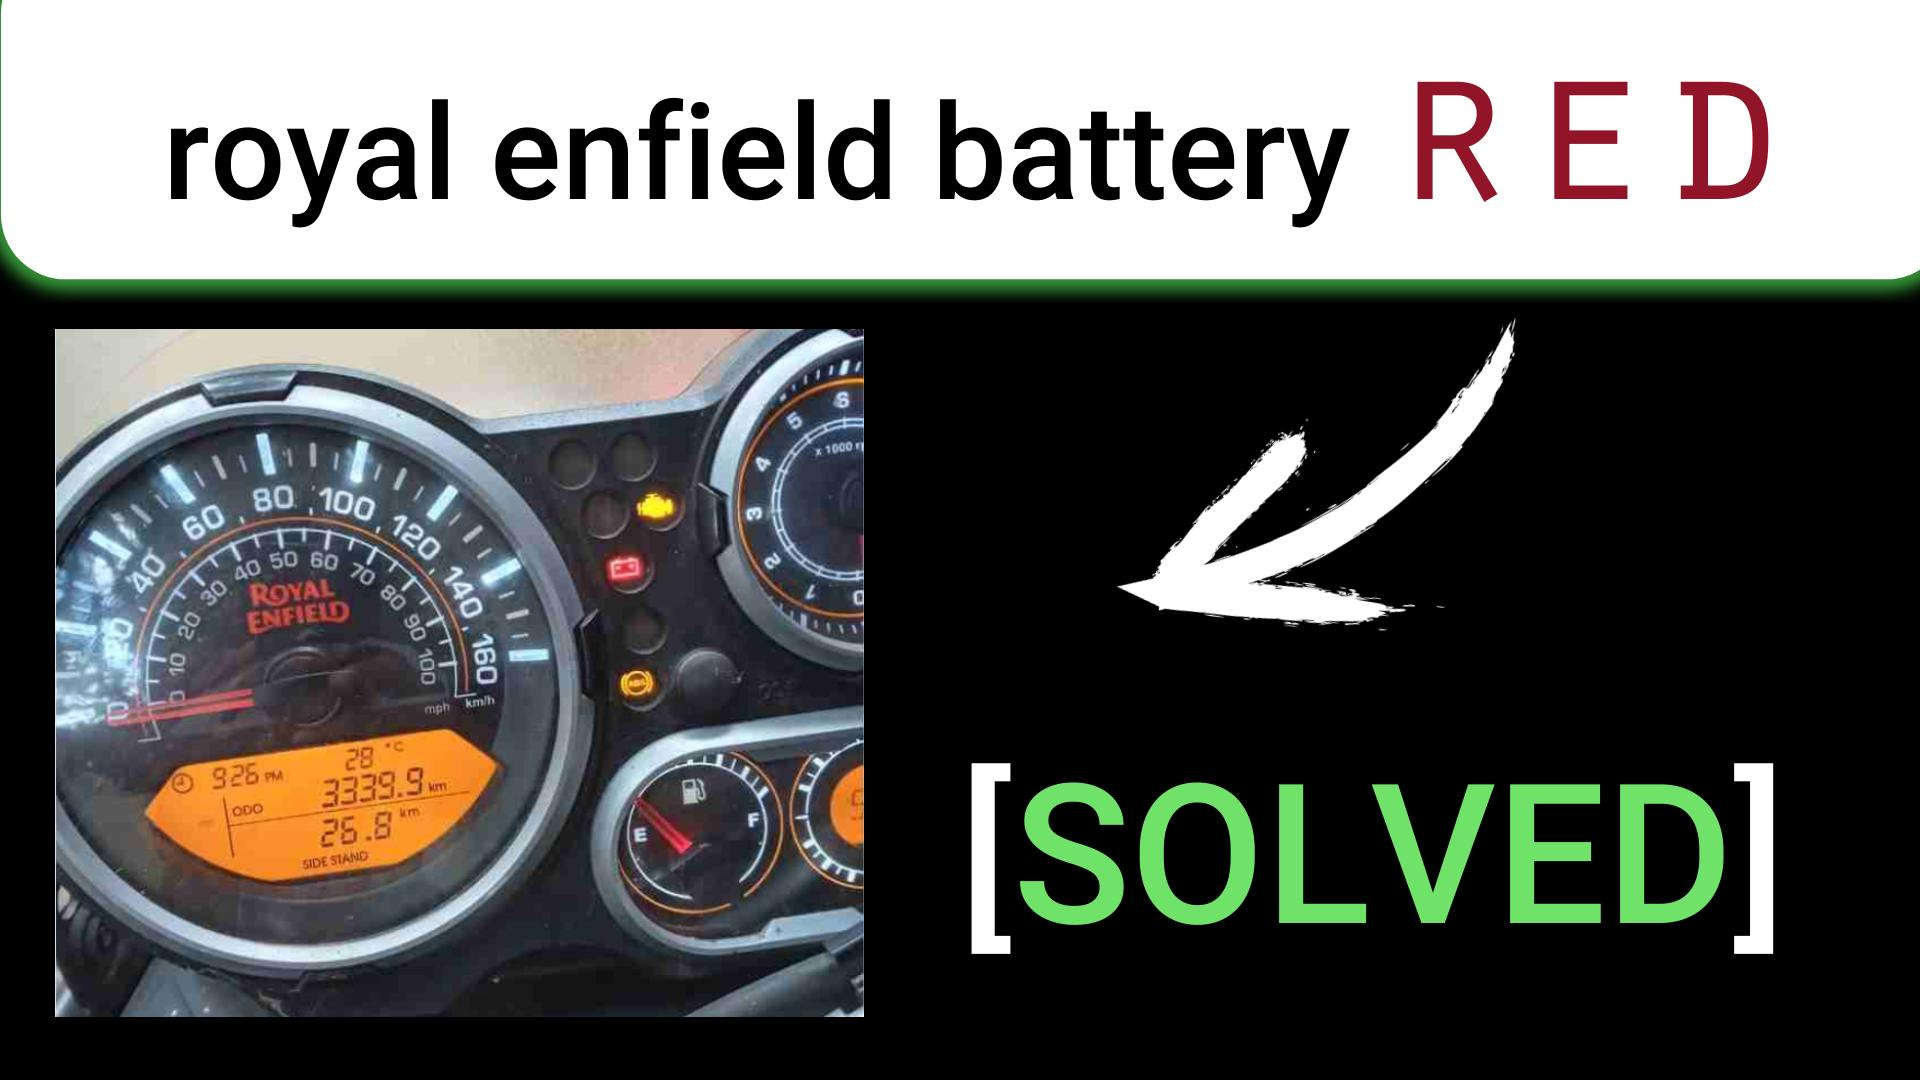 Royal enfield battery indicator red - solution